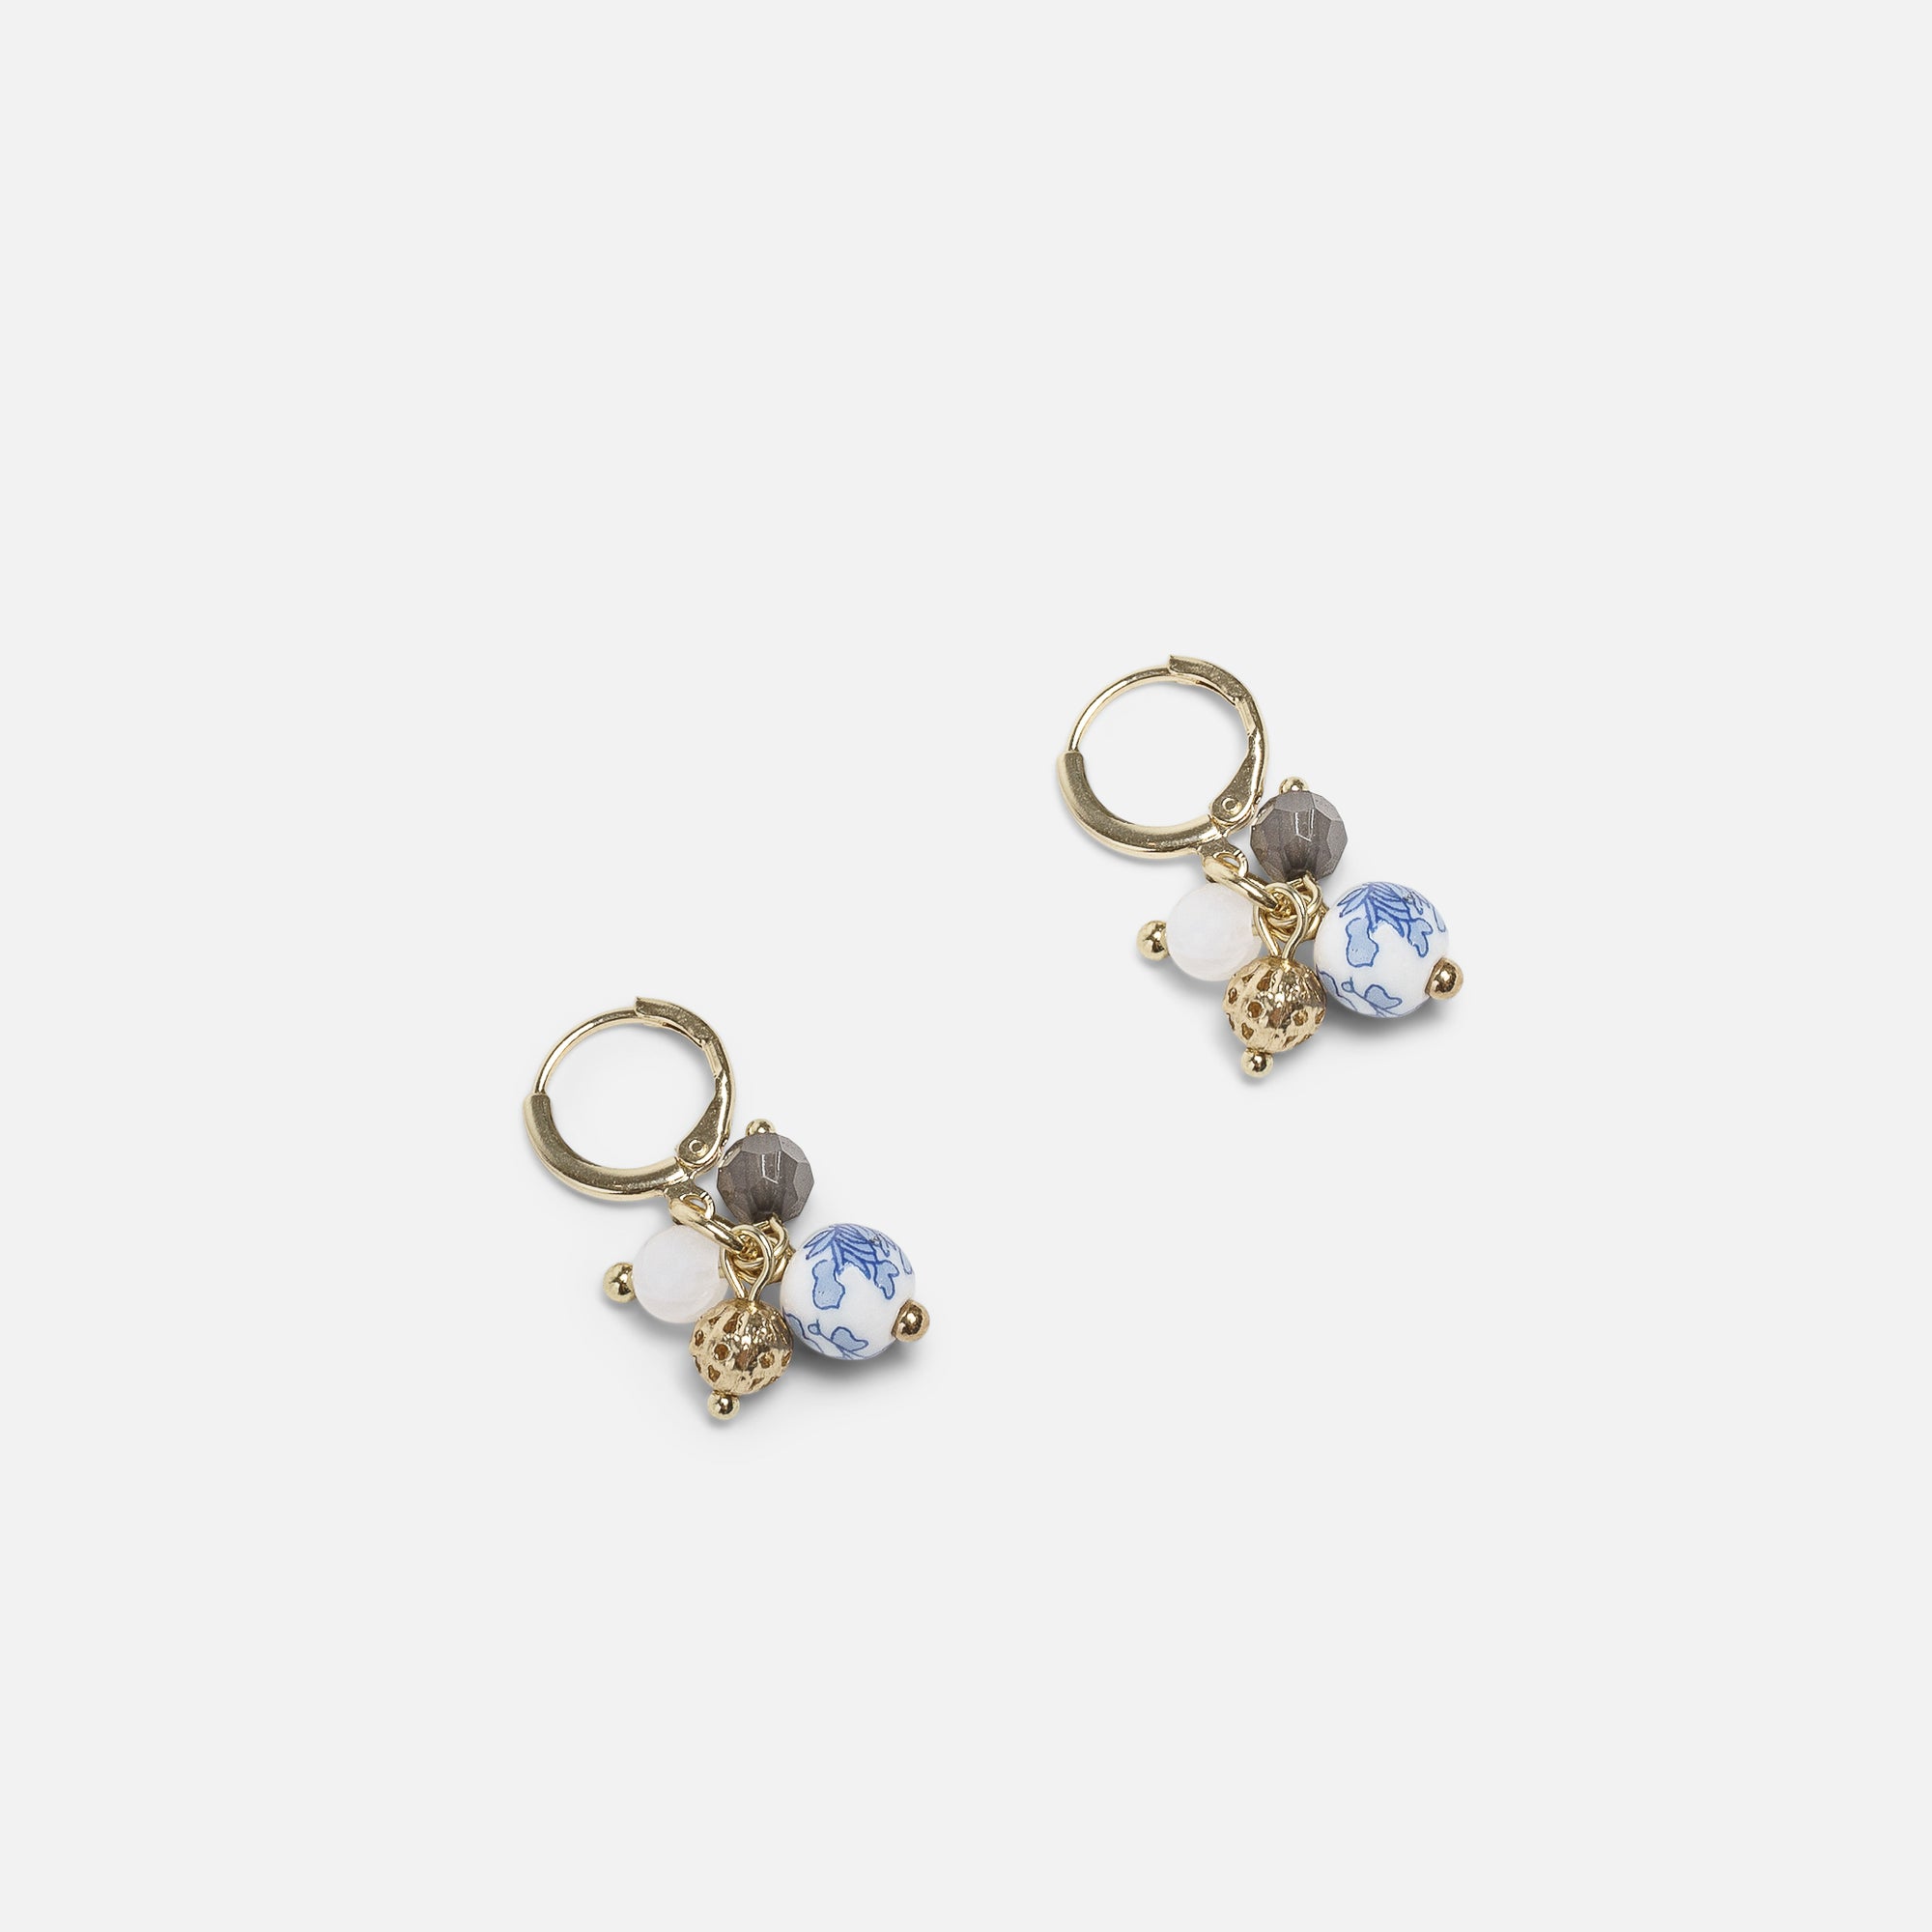 Golden hoop earrings with charms